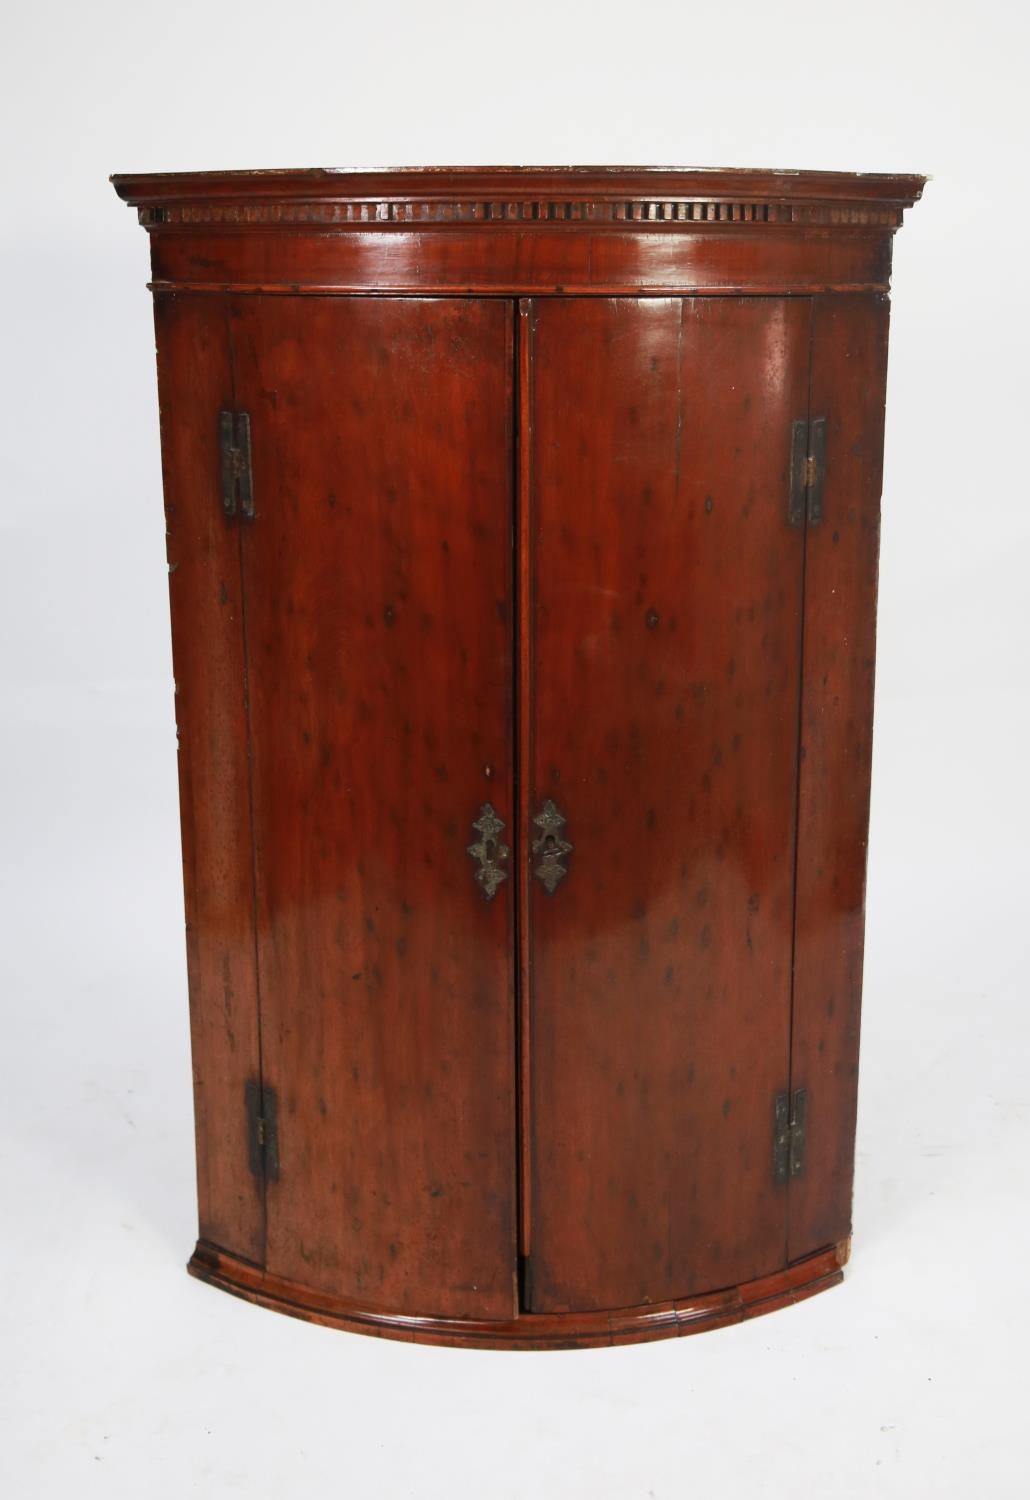 GEORGE III ’PLUM PUDDING’ MAHOGANY BOW FRONTED CORNER CUPBOARD, of typical form with dentil